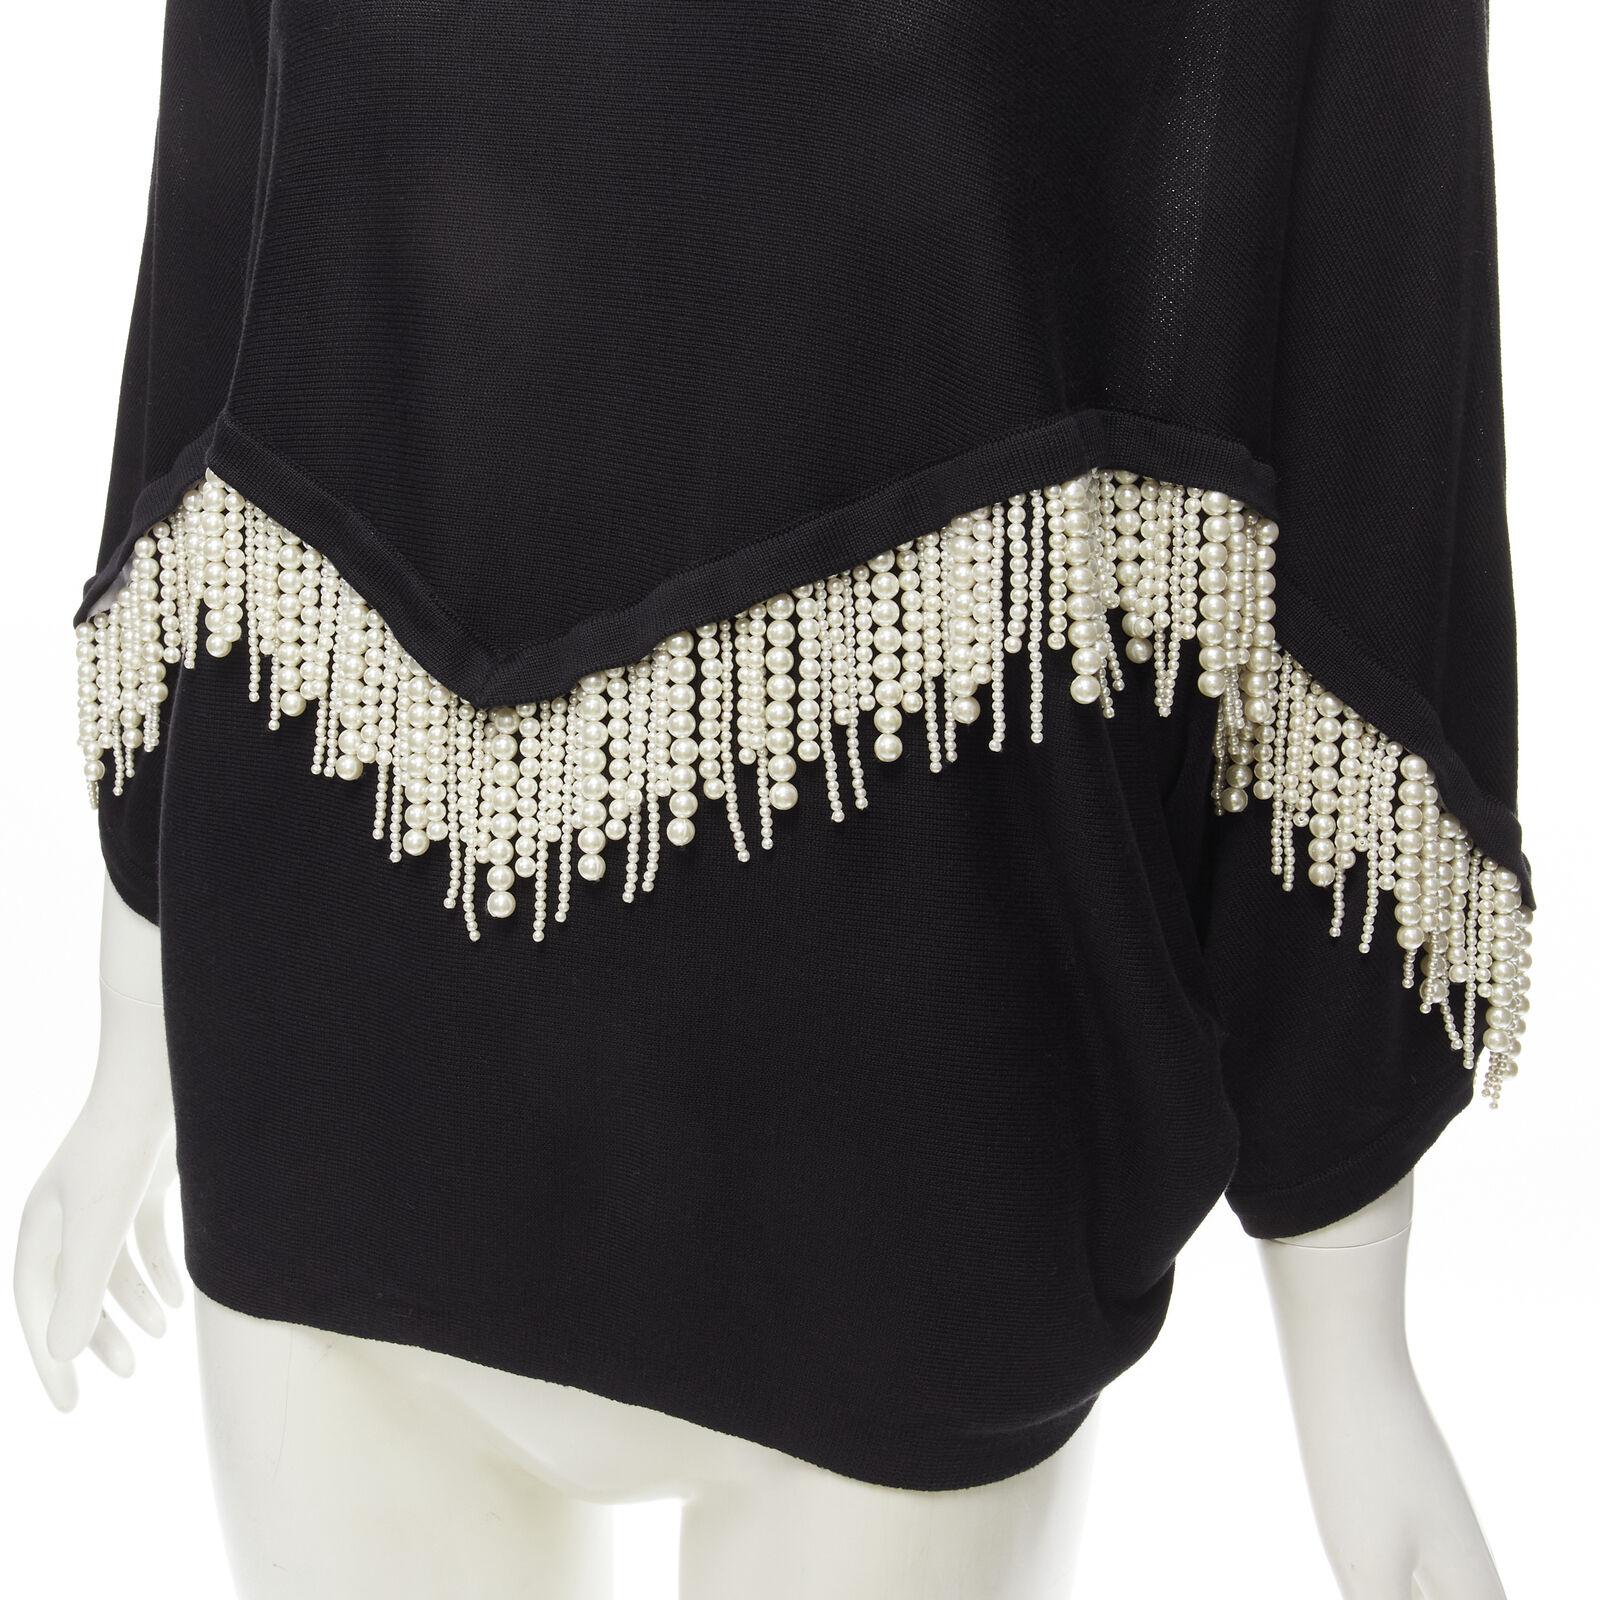 GIAMBATTISTA VALLI black dolman sleeve pearl fringe sweater top IT44 M
Reference: AAWC/A00226
Brand: Giambattista Valli
Designer: Giambattista Valli
Color: Black
Pattern: Solid

CONDITION:
Condition: Excellent, this item was pre-owned and is in